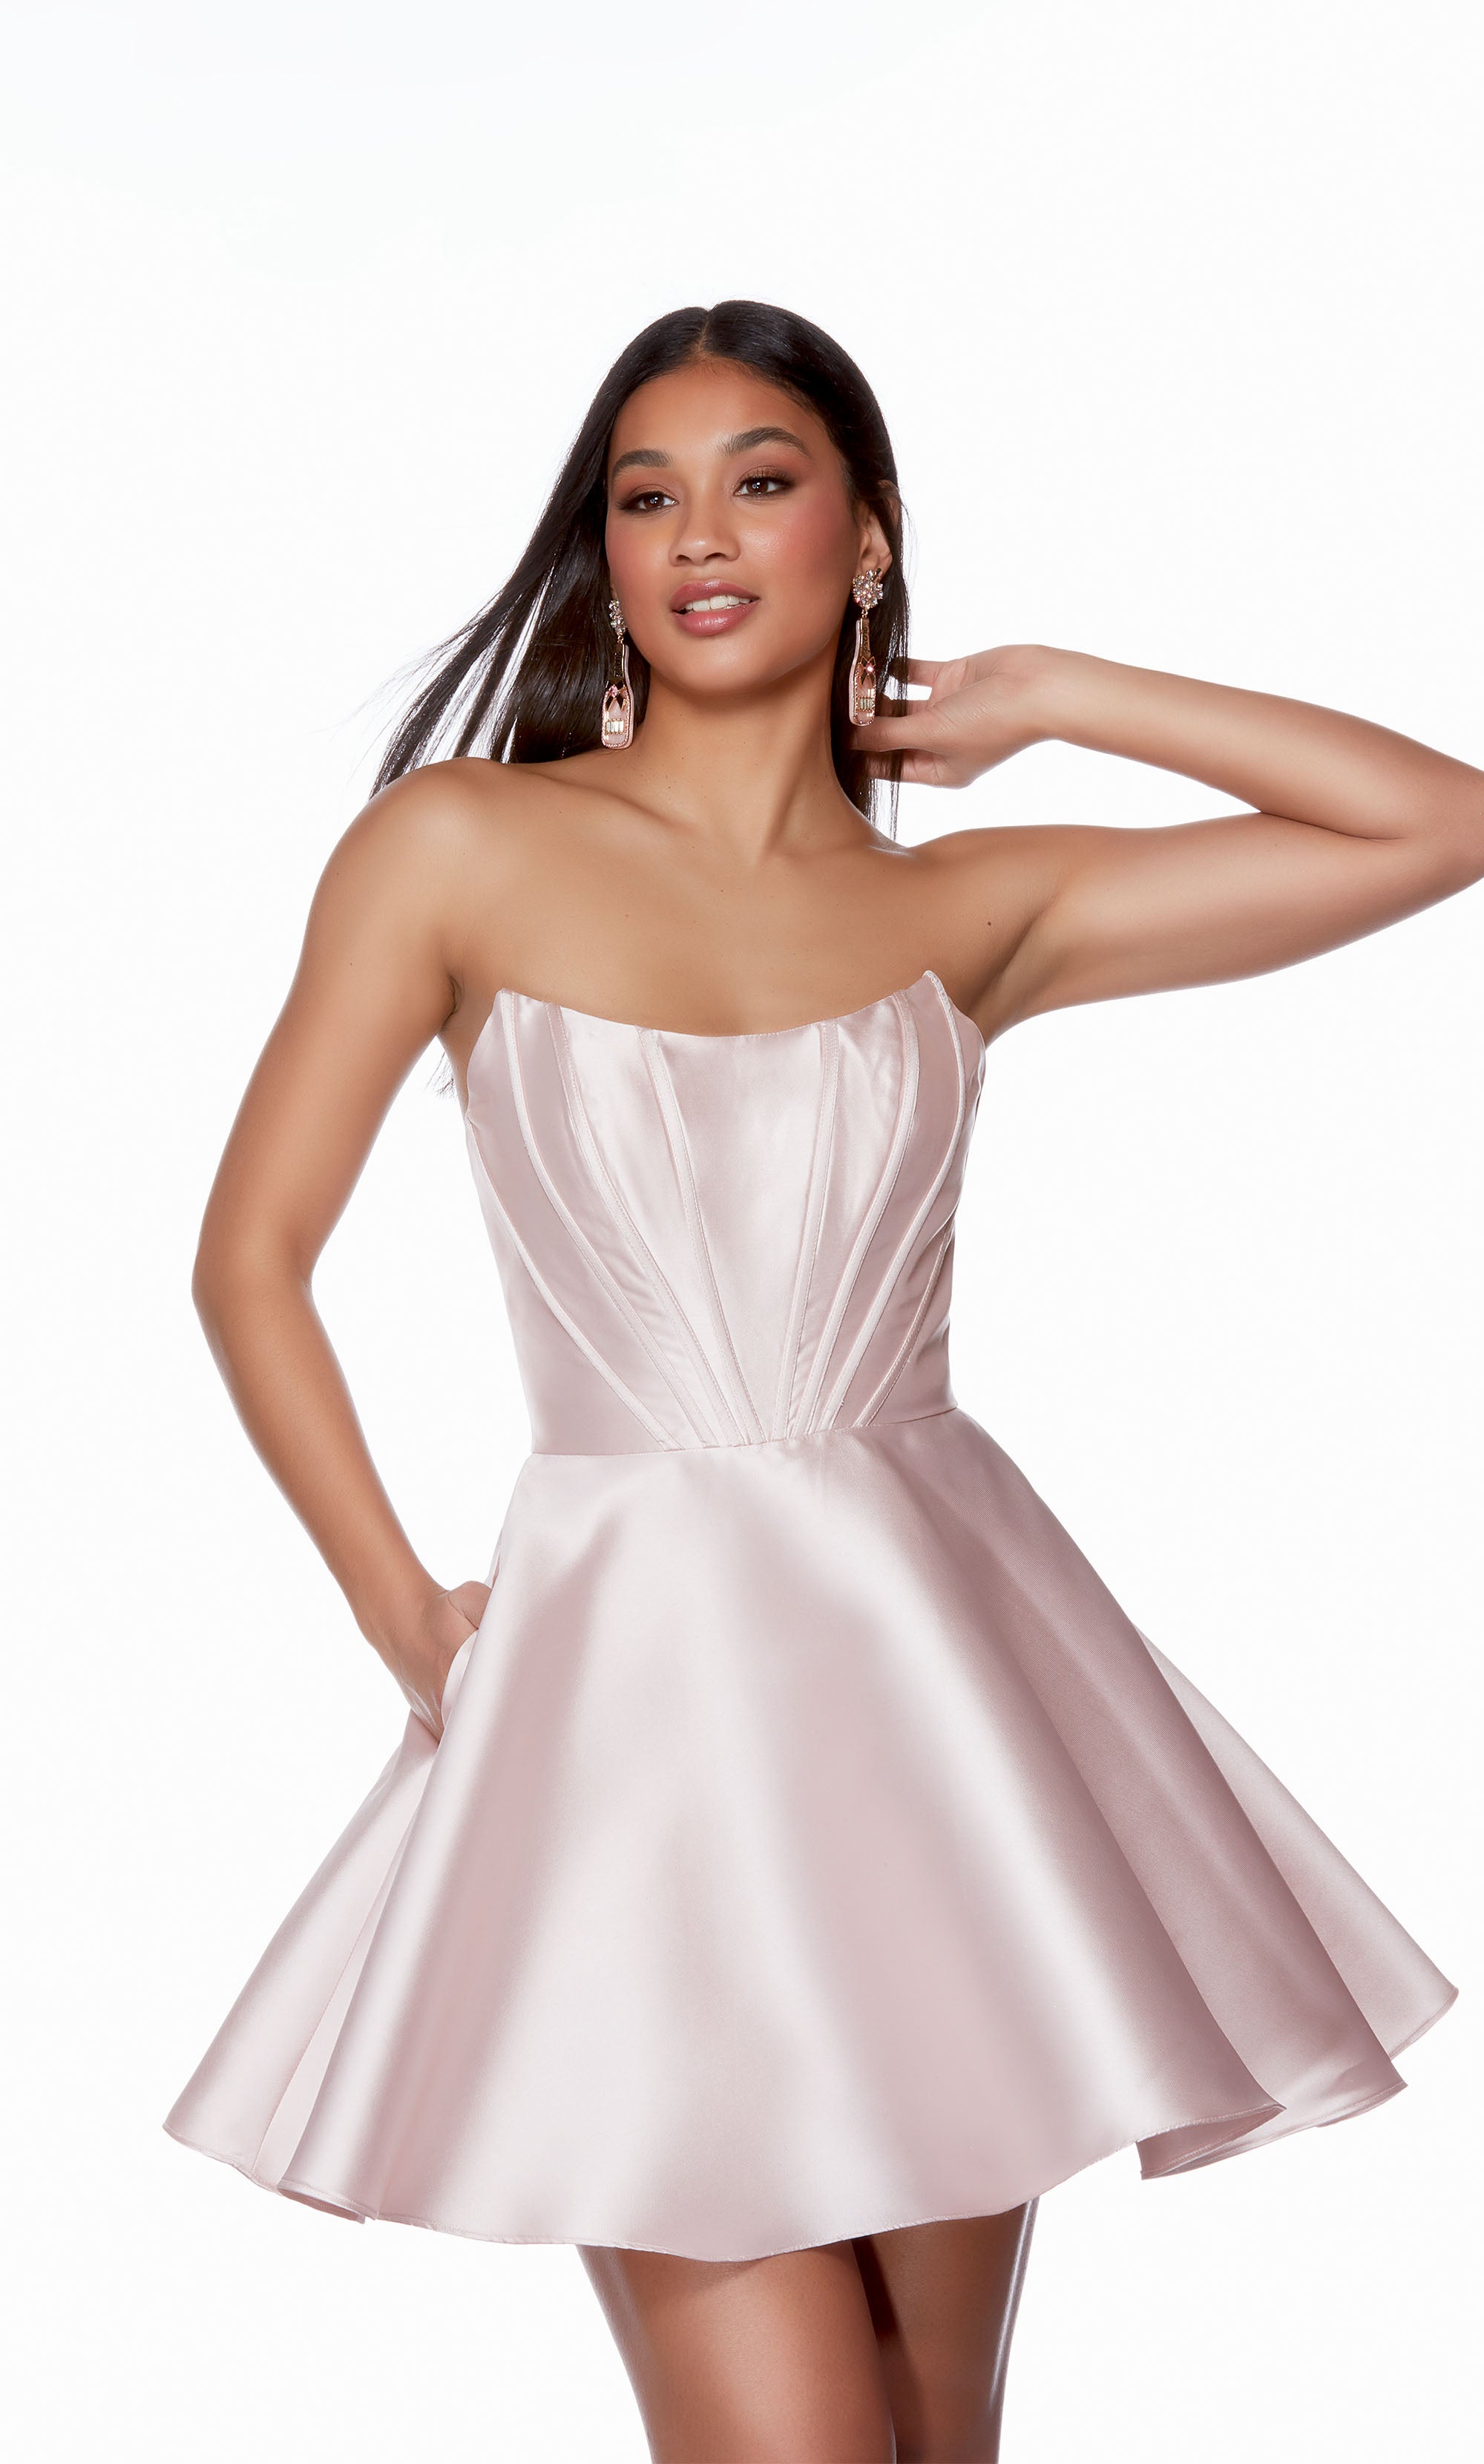 A modern and trendy short formal dress, featuring a strapless corset bodice and flirty flared skirt with pockets, perfect for dancing the night away.